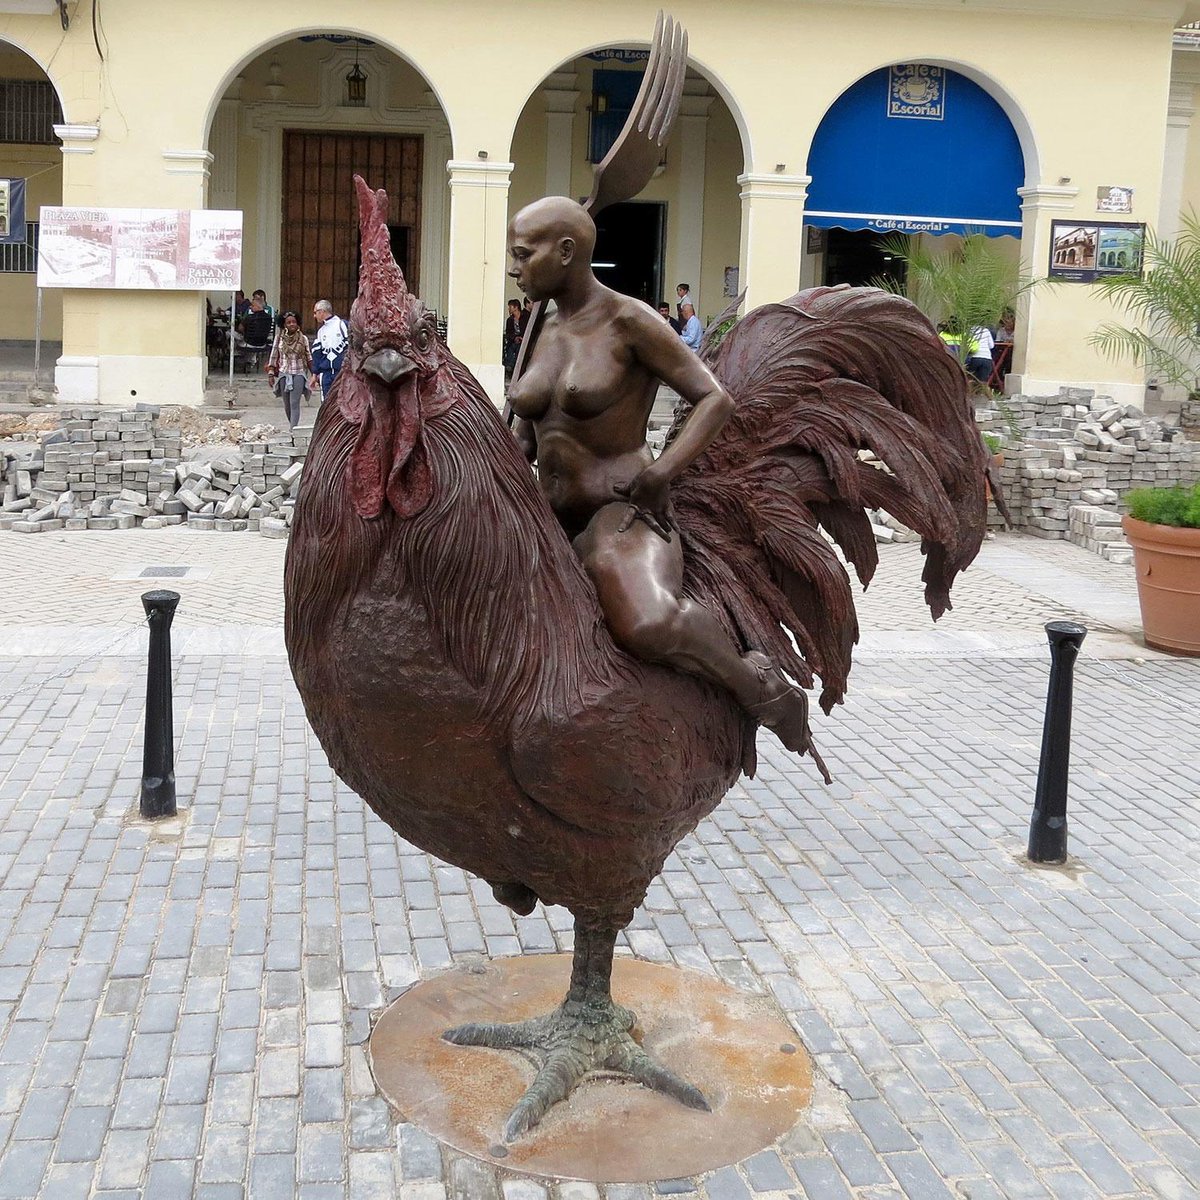 This statue is by Roberto Fabelo. No one knows what its called, or what is actually going on here, but this piece of art is currently on display in Cuba.